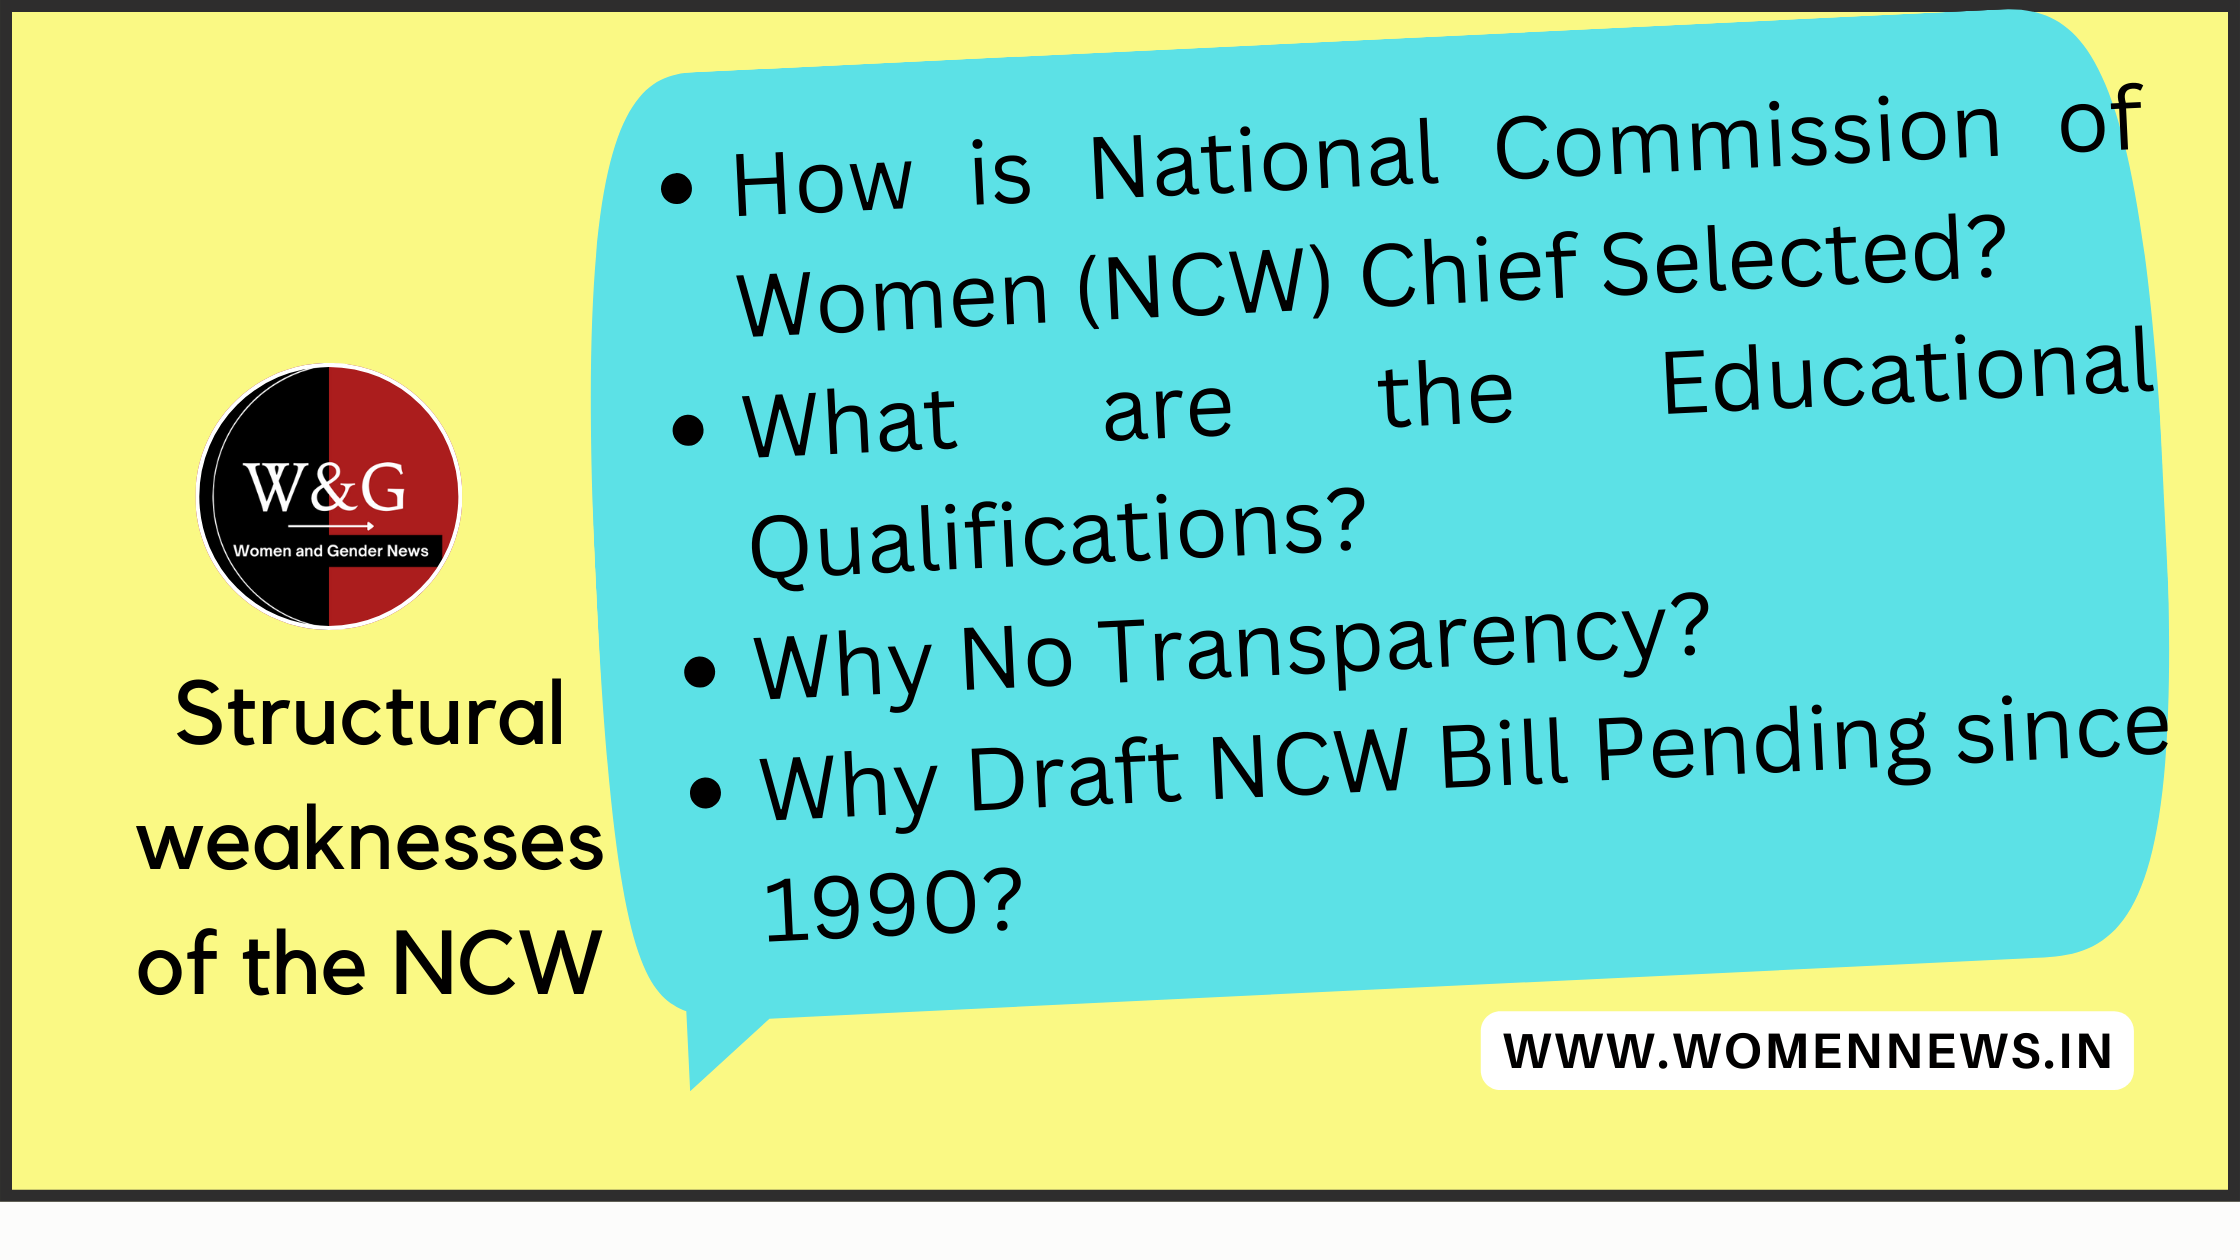 How is National Commission of Women (NCW) Chief Selected? What are the Qualifications? Why no Transparency? Why NCW Draft Bill Pending Since 1990?